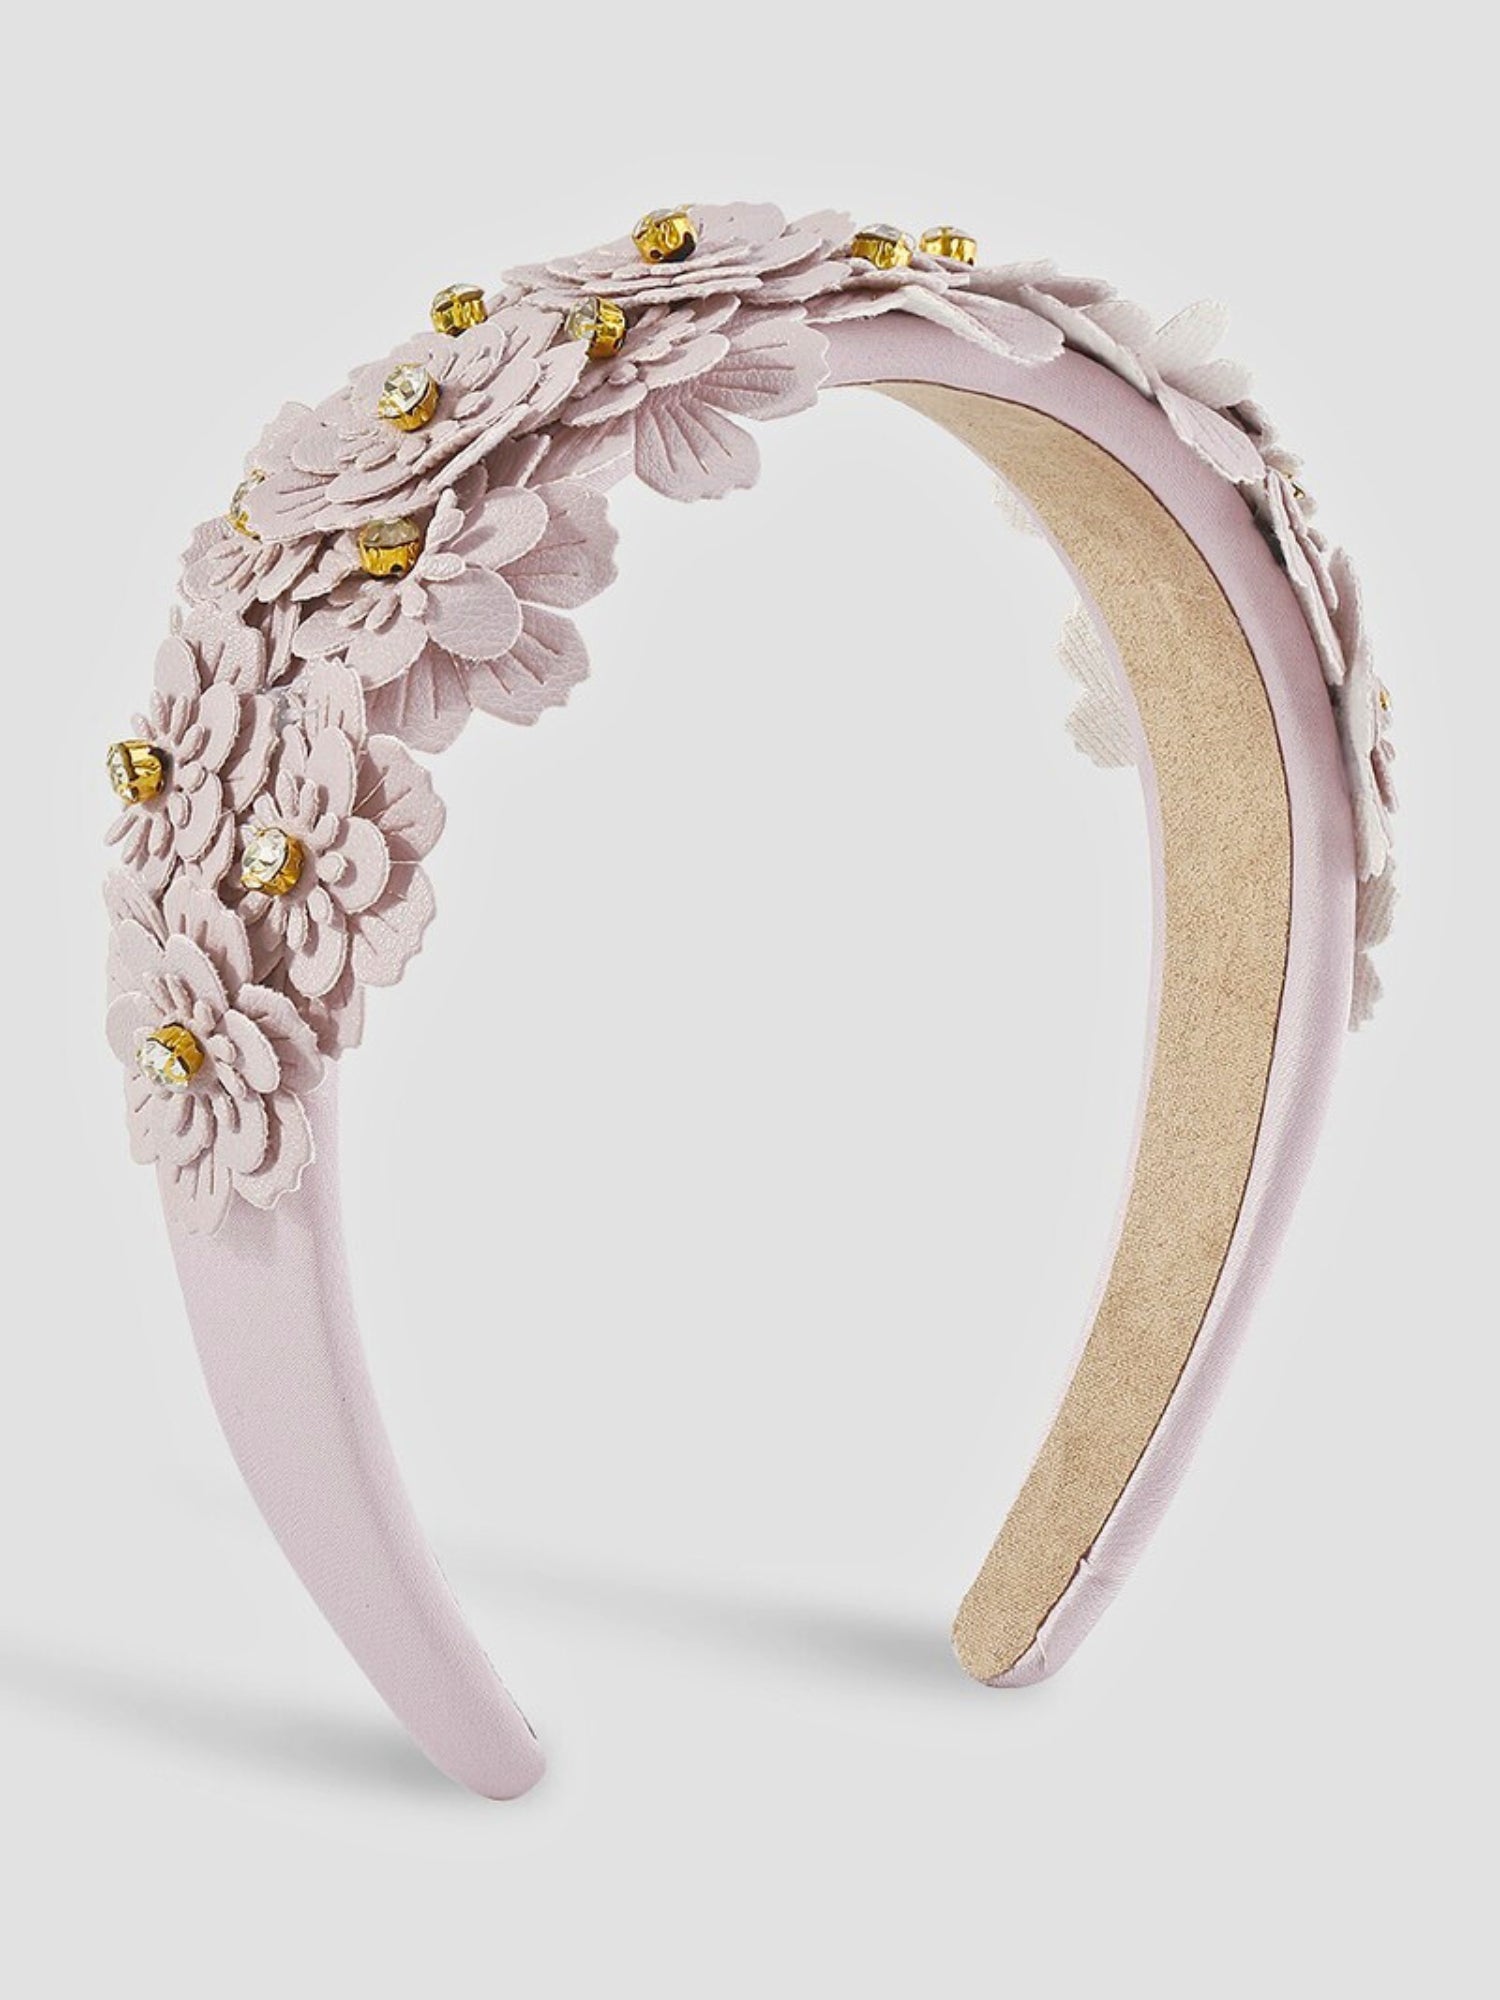 The Lilac Jewel Headband - The Lilac Jewel headband is made is the sweetest most delicate shade of purple and is adorned with laser cut flower appliques, at the center of each flower sits a rhinestone adding the daintiest touch of dazzle. This piece is ma